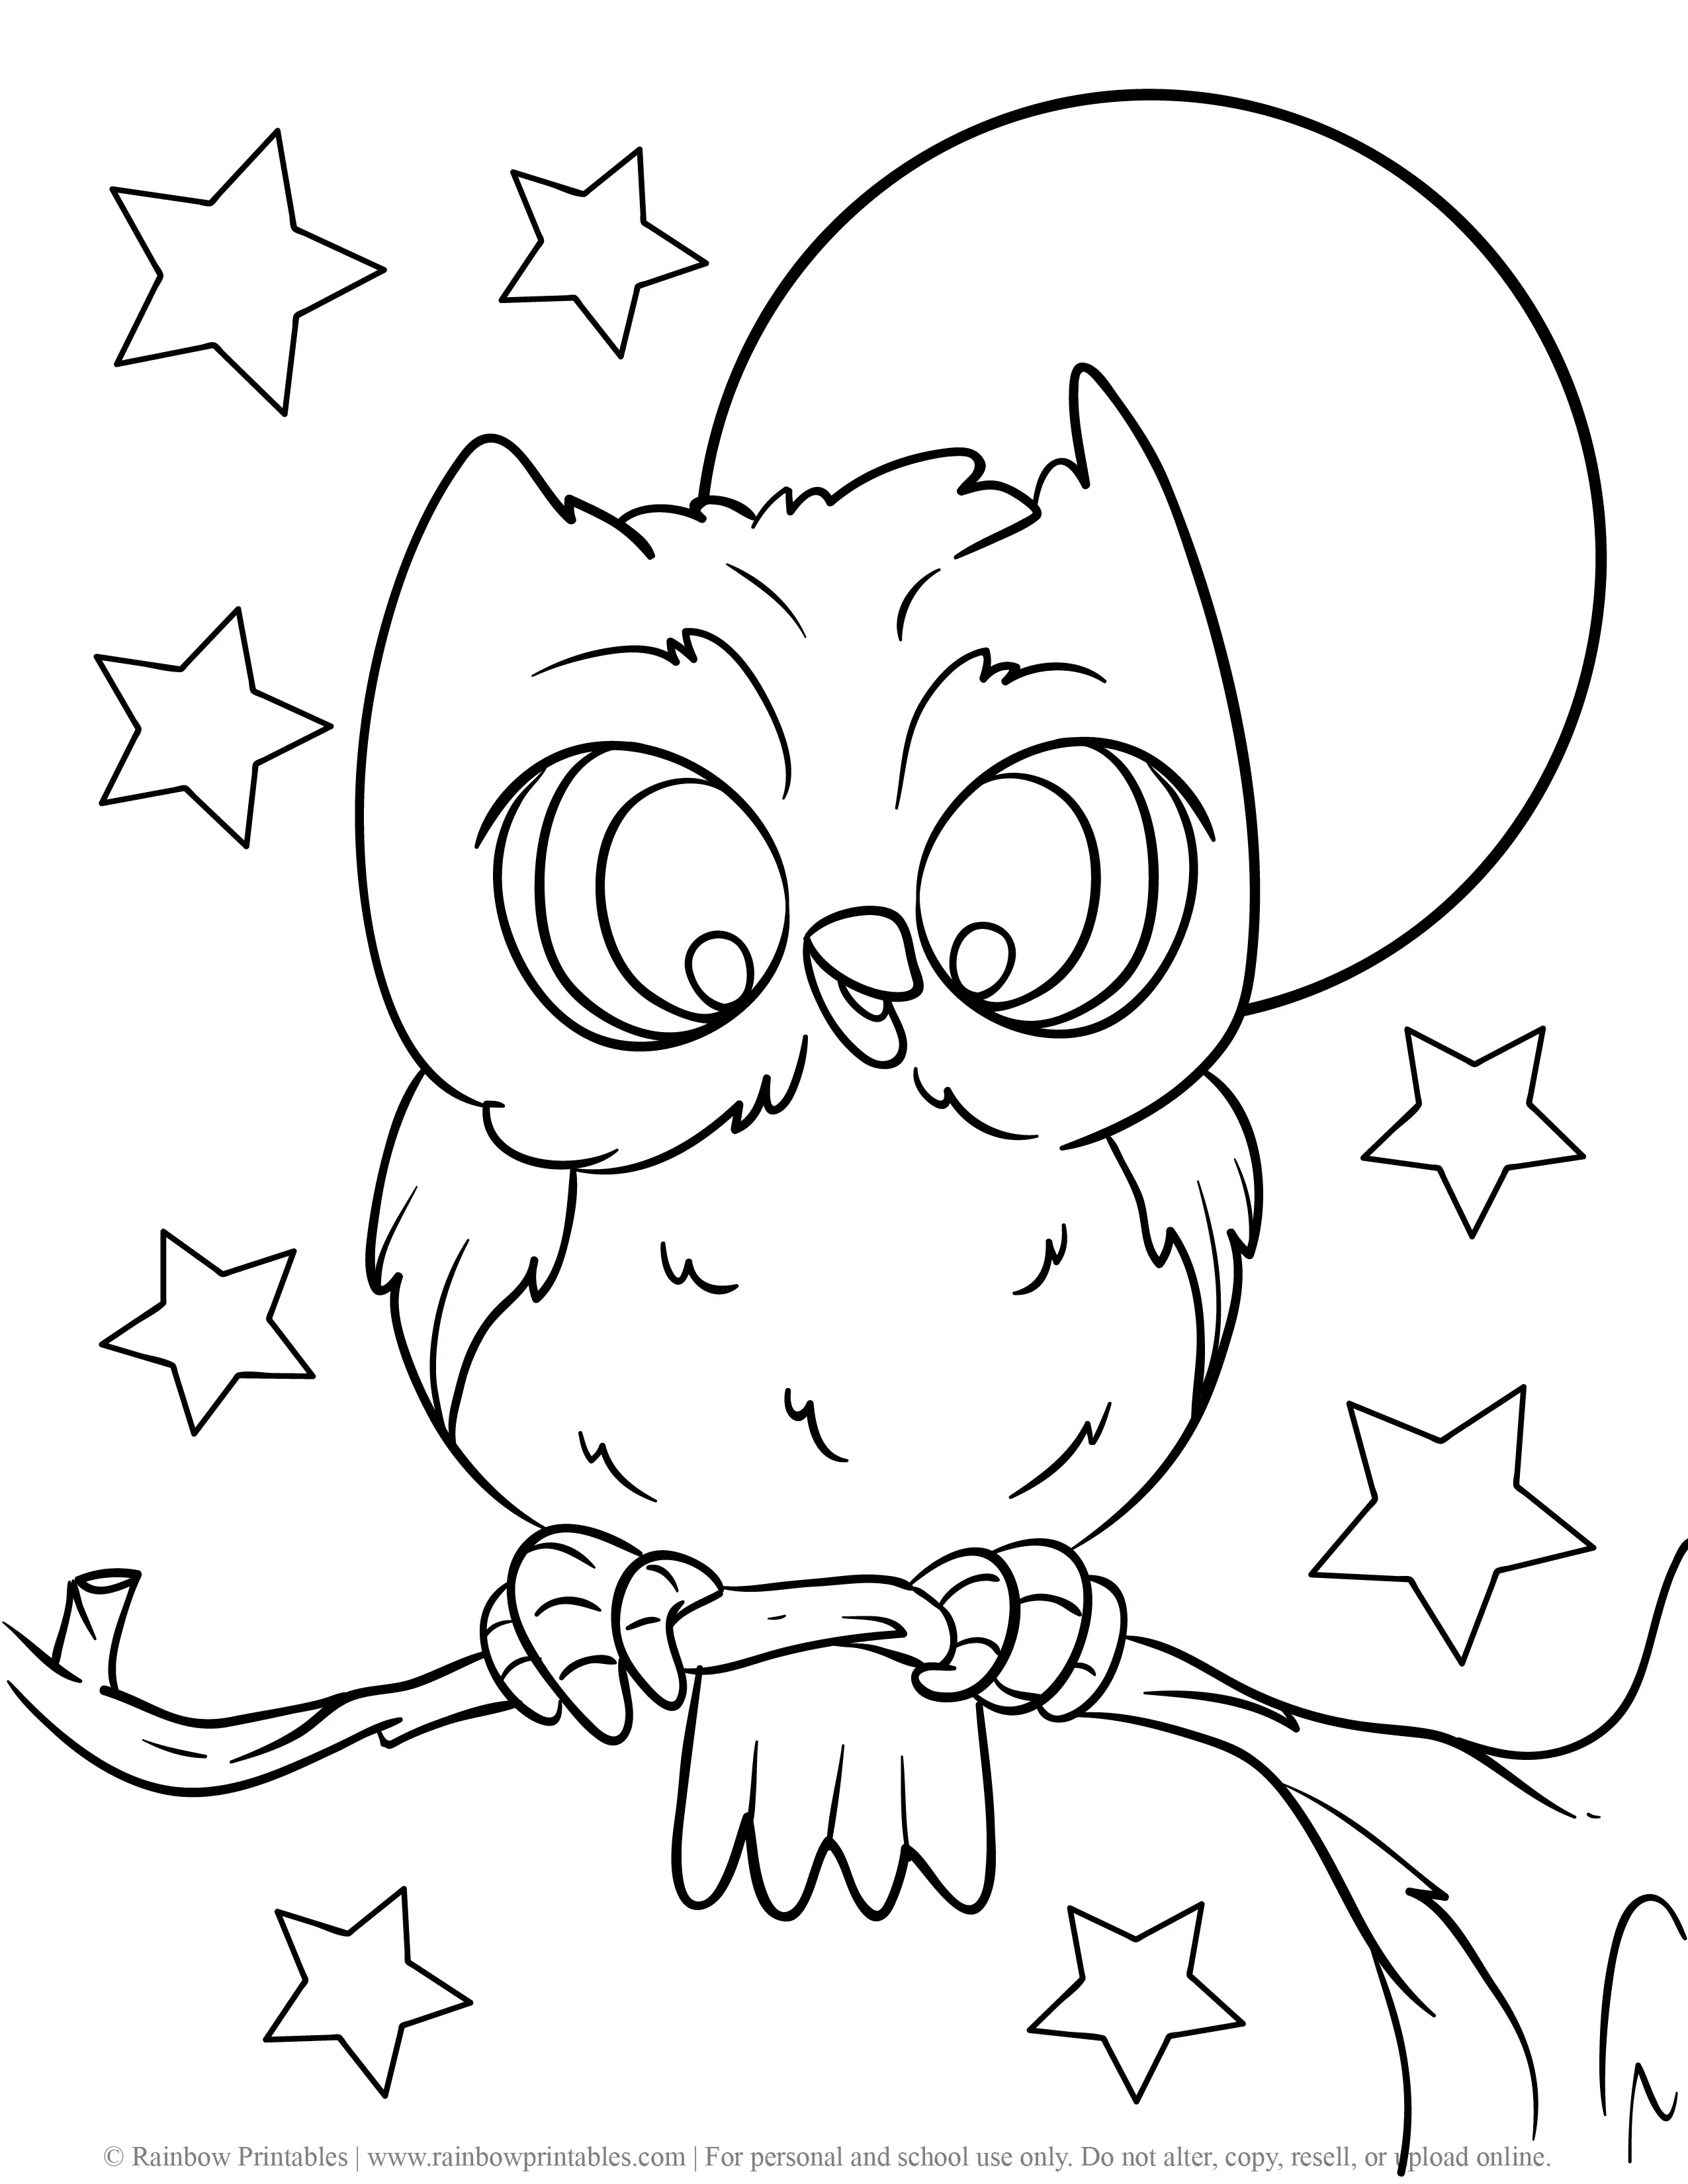 Free Coloring Pages for Kids Drawing Activities Line Art Illustration CUTE HALLOWEEN OWL NIGHTTIME MOON STARS